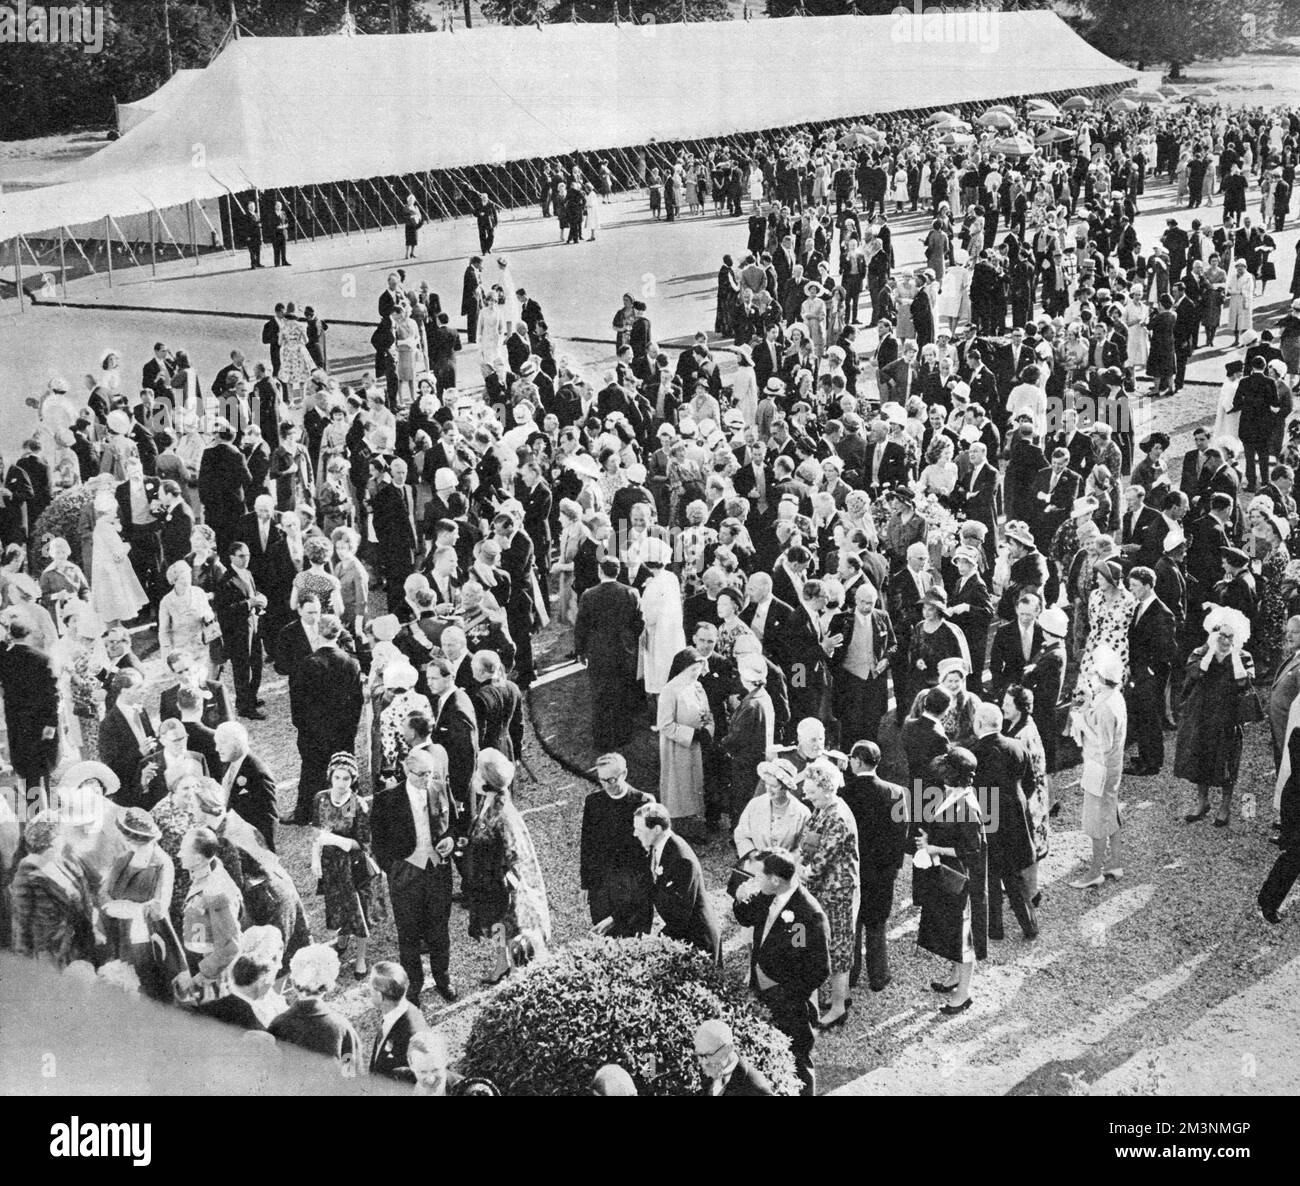 Some of the 2000 guests at teh wedding reception following the marriage of the Duke of Kent to Miss Katherine Worsley at York Minster on 8 June 1961.  The reception was held at Hovingham Hall, the bride's family home, and guests can be seen strolling about on the extensive lawns beside a vast marquee.     Date: 1961 Stock Photo